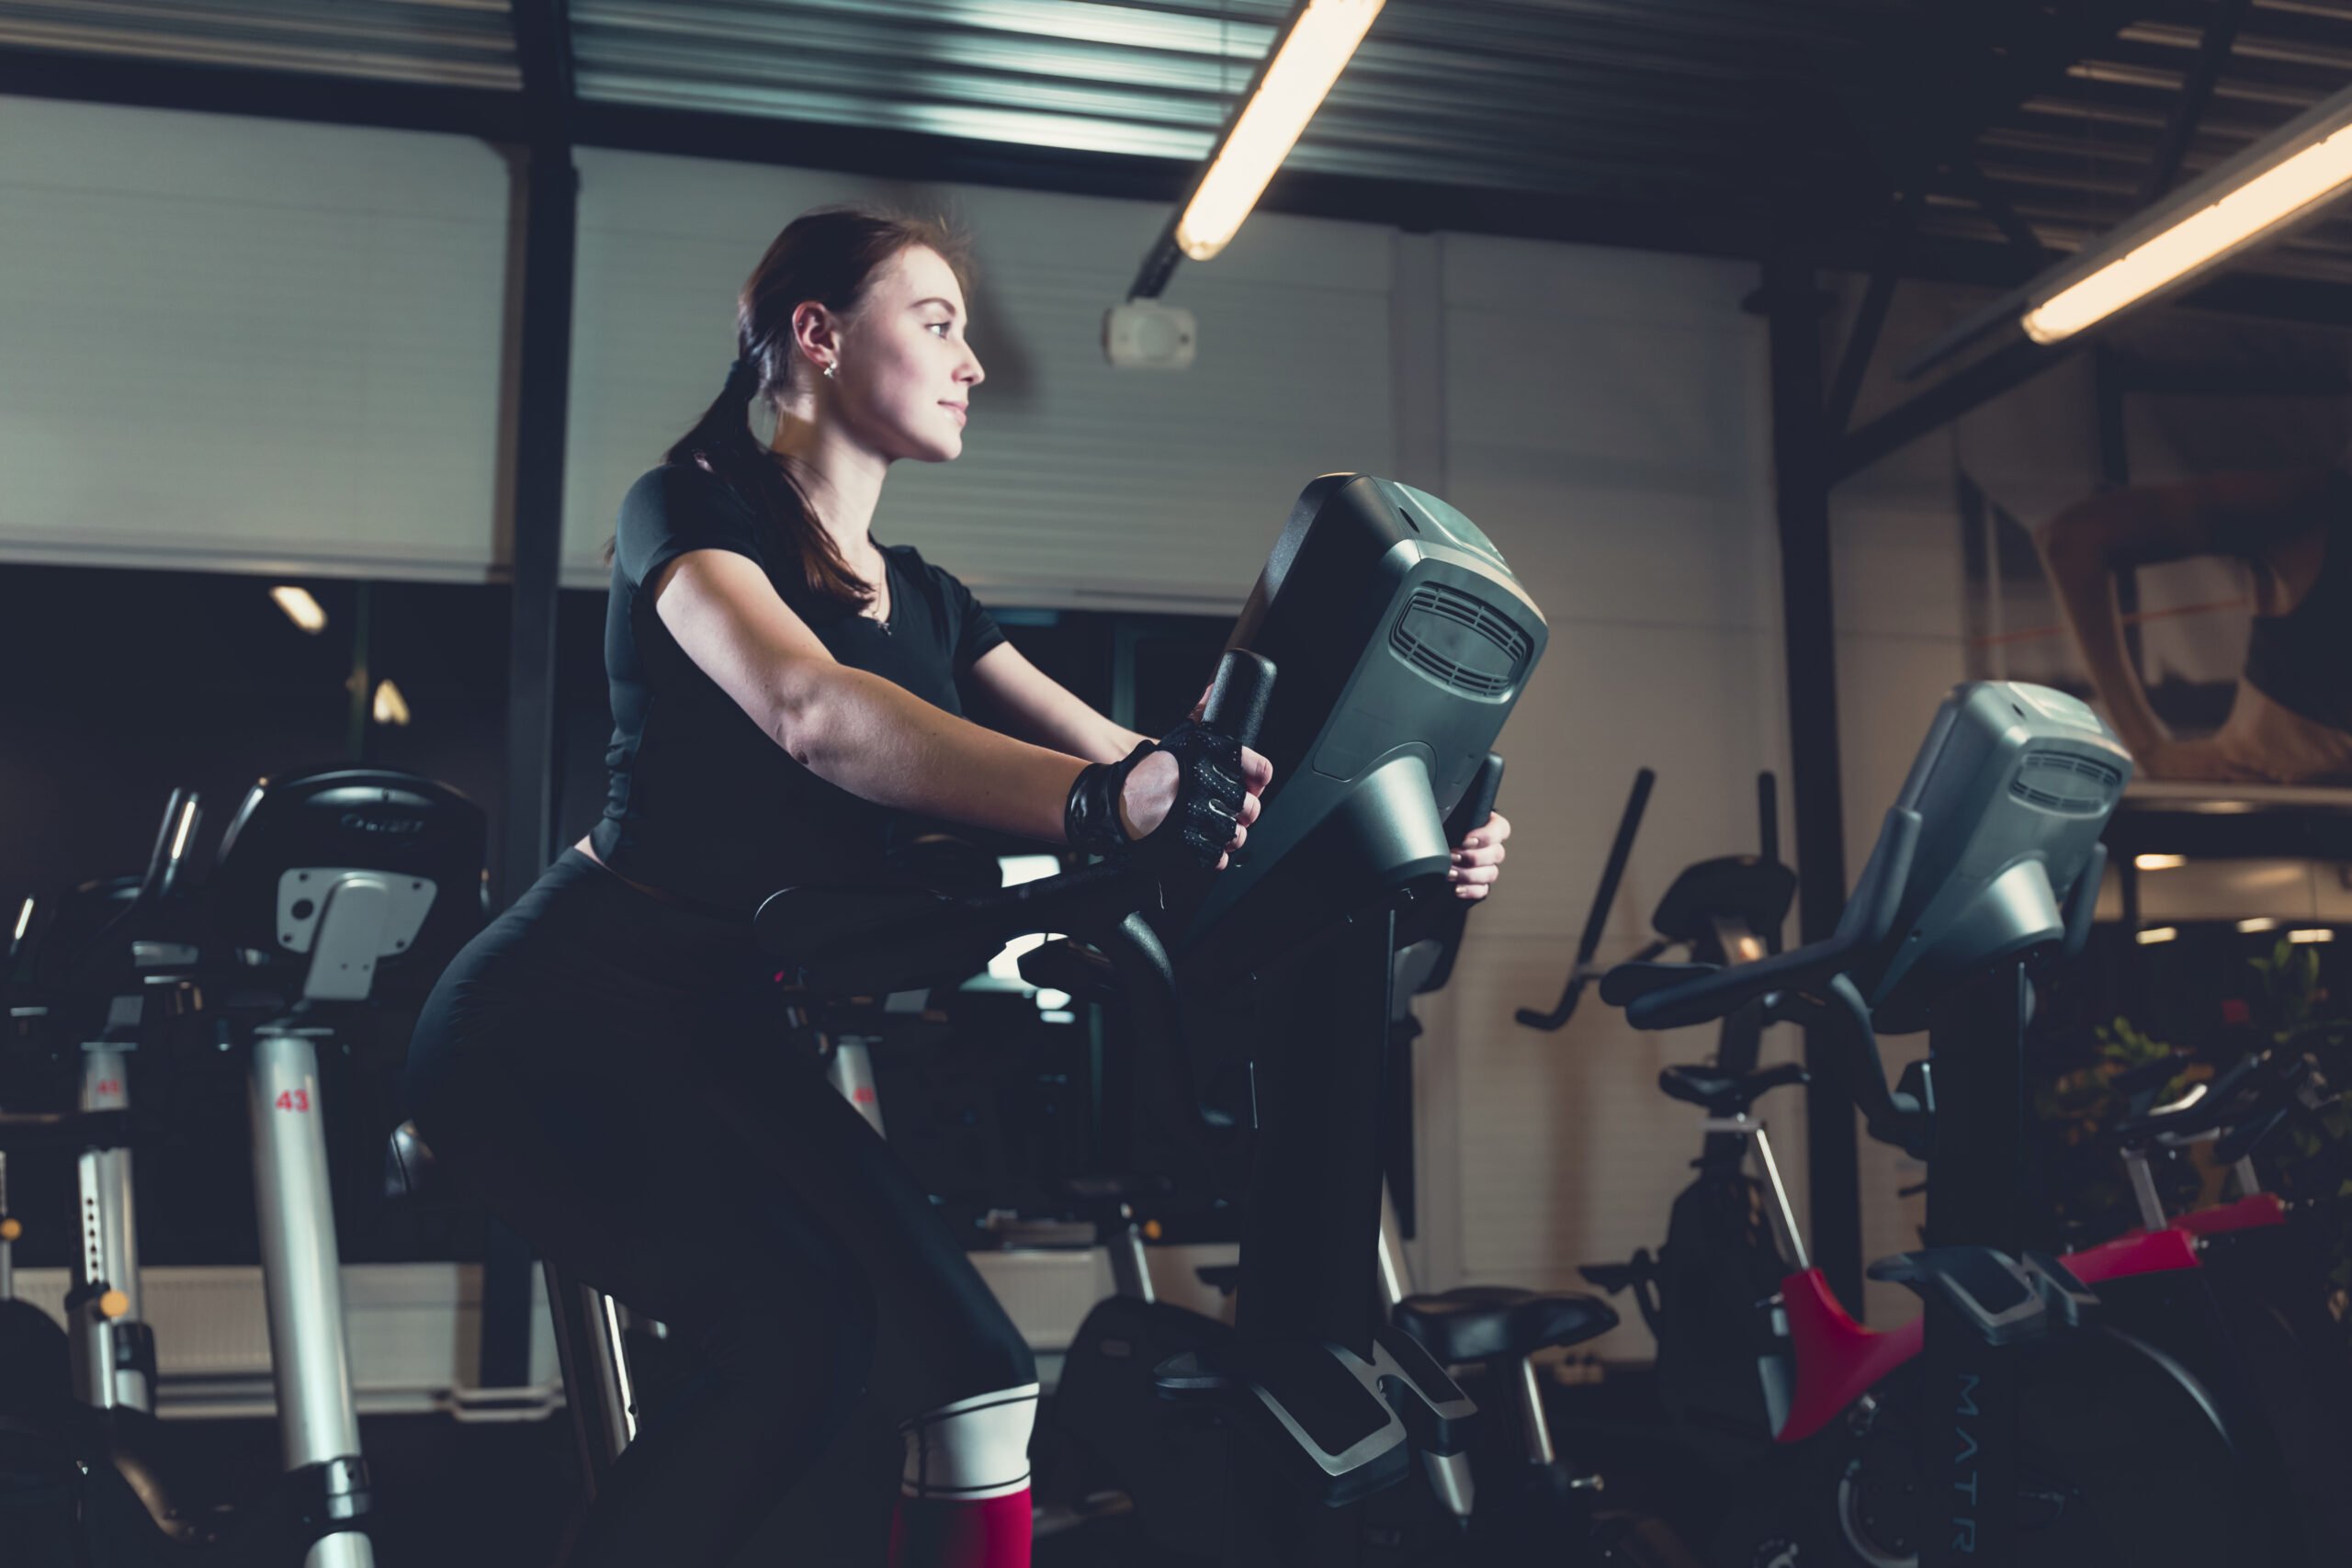 side-view-young-woman-riding-exercise-bike-gym-scaled.jpg